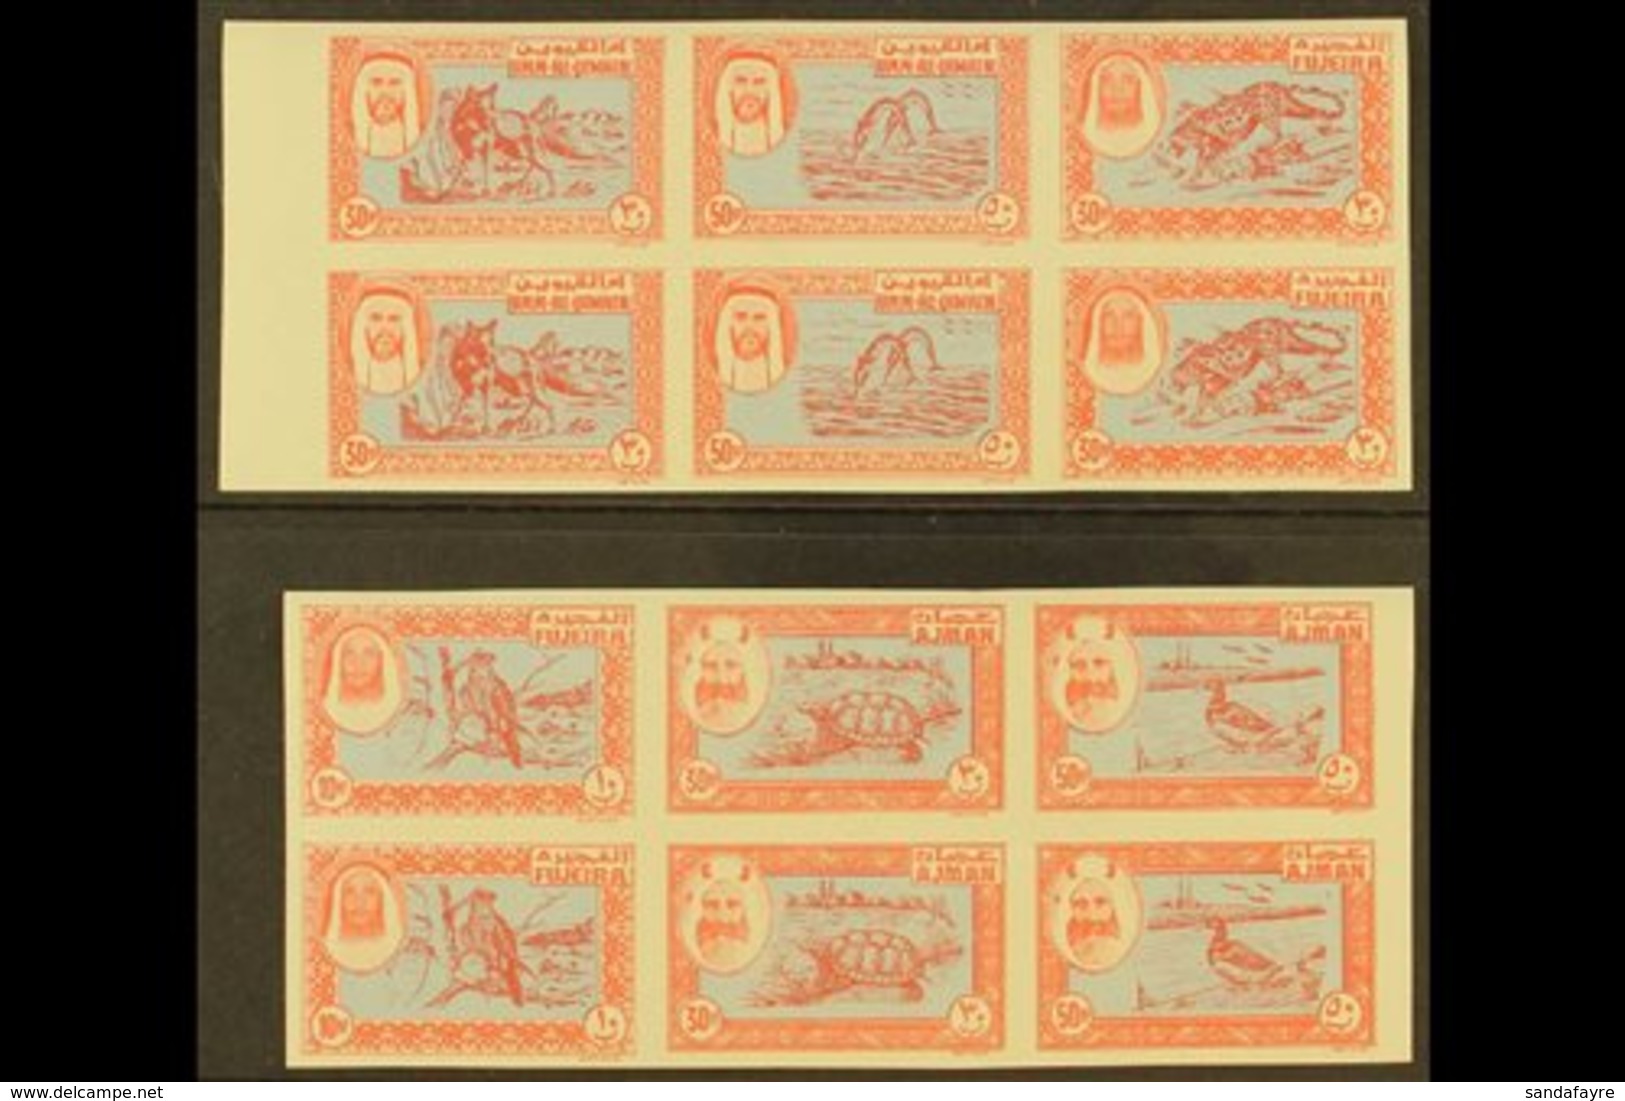 FLORA & FAUNA  TRUCIAL STATES - UNISSUED DESIGNS 1963 Animals, Blue & Rose, Set Of 10np, 30np & 50np Values In Two, Se-t - Unclassified